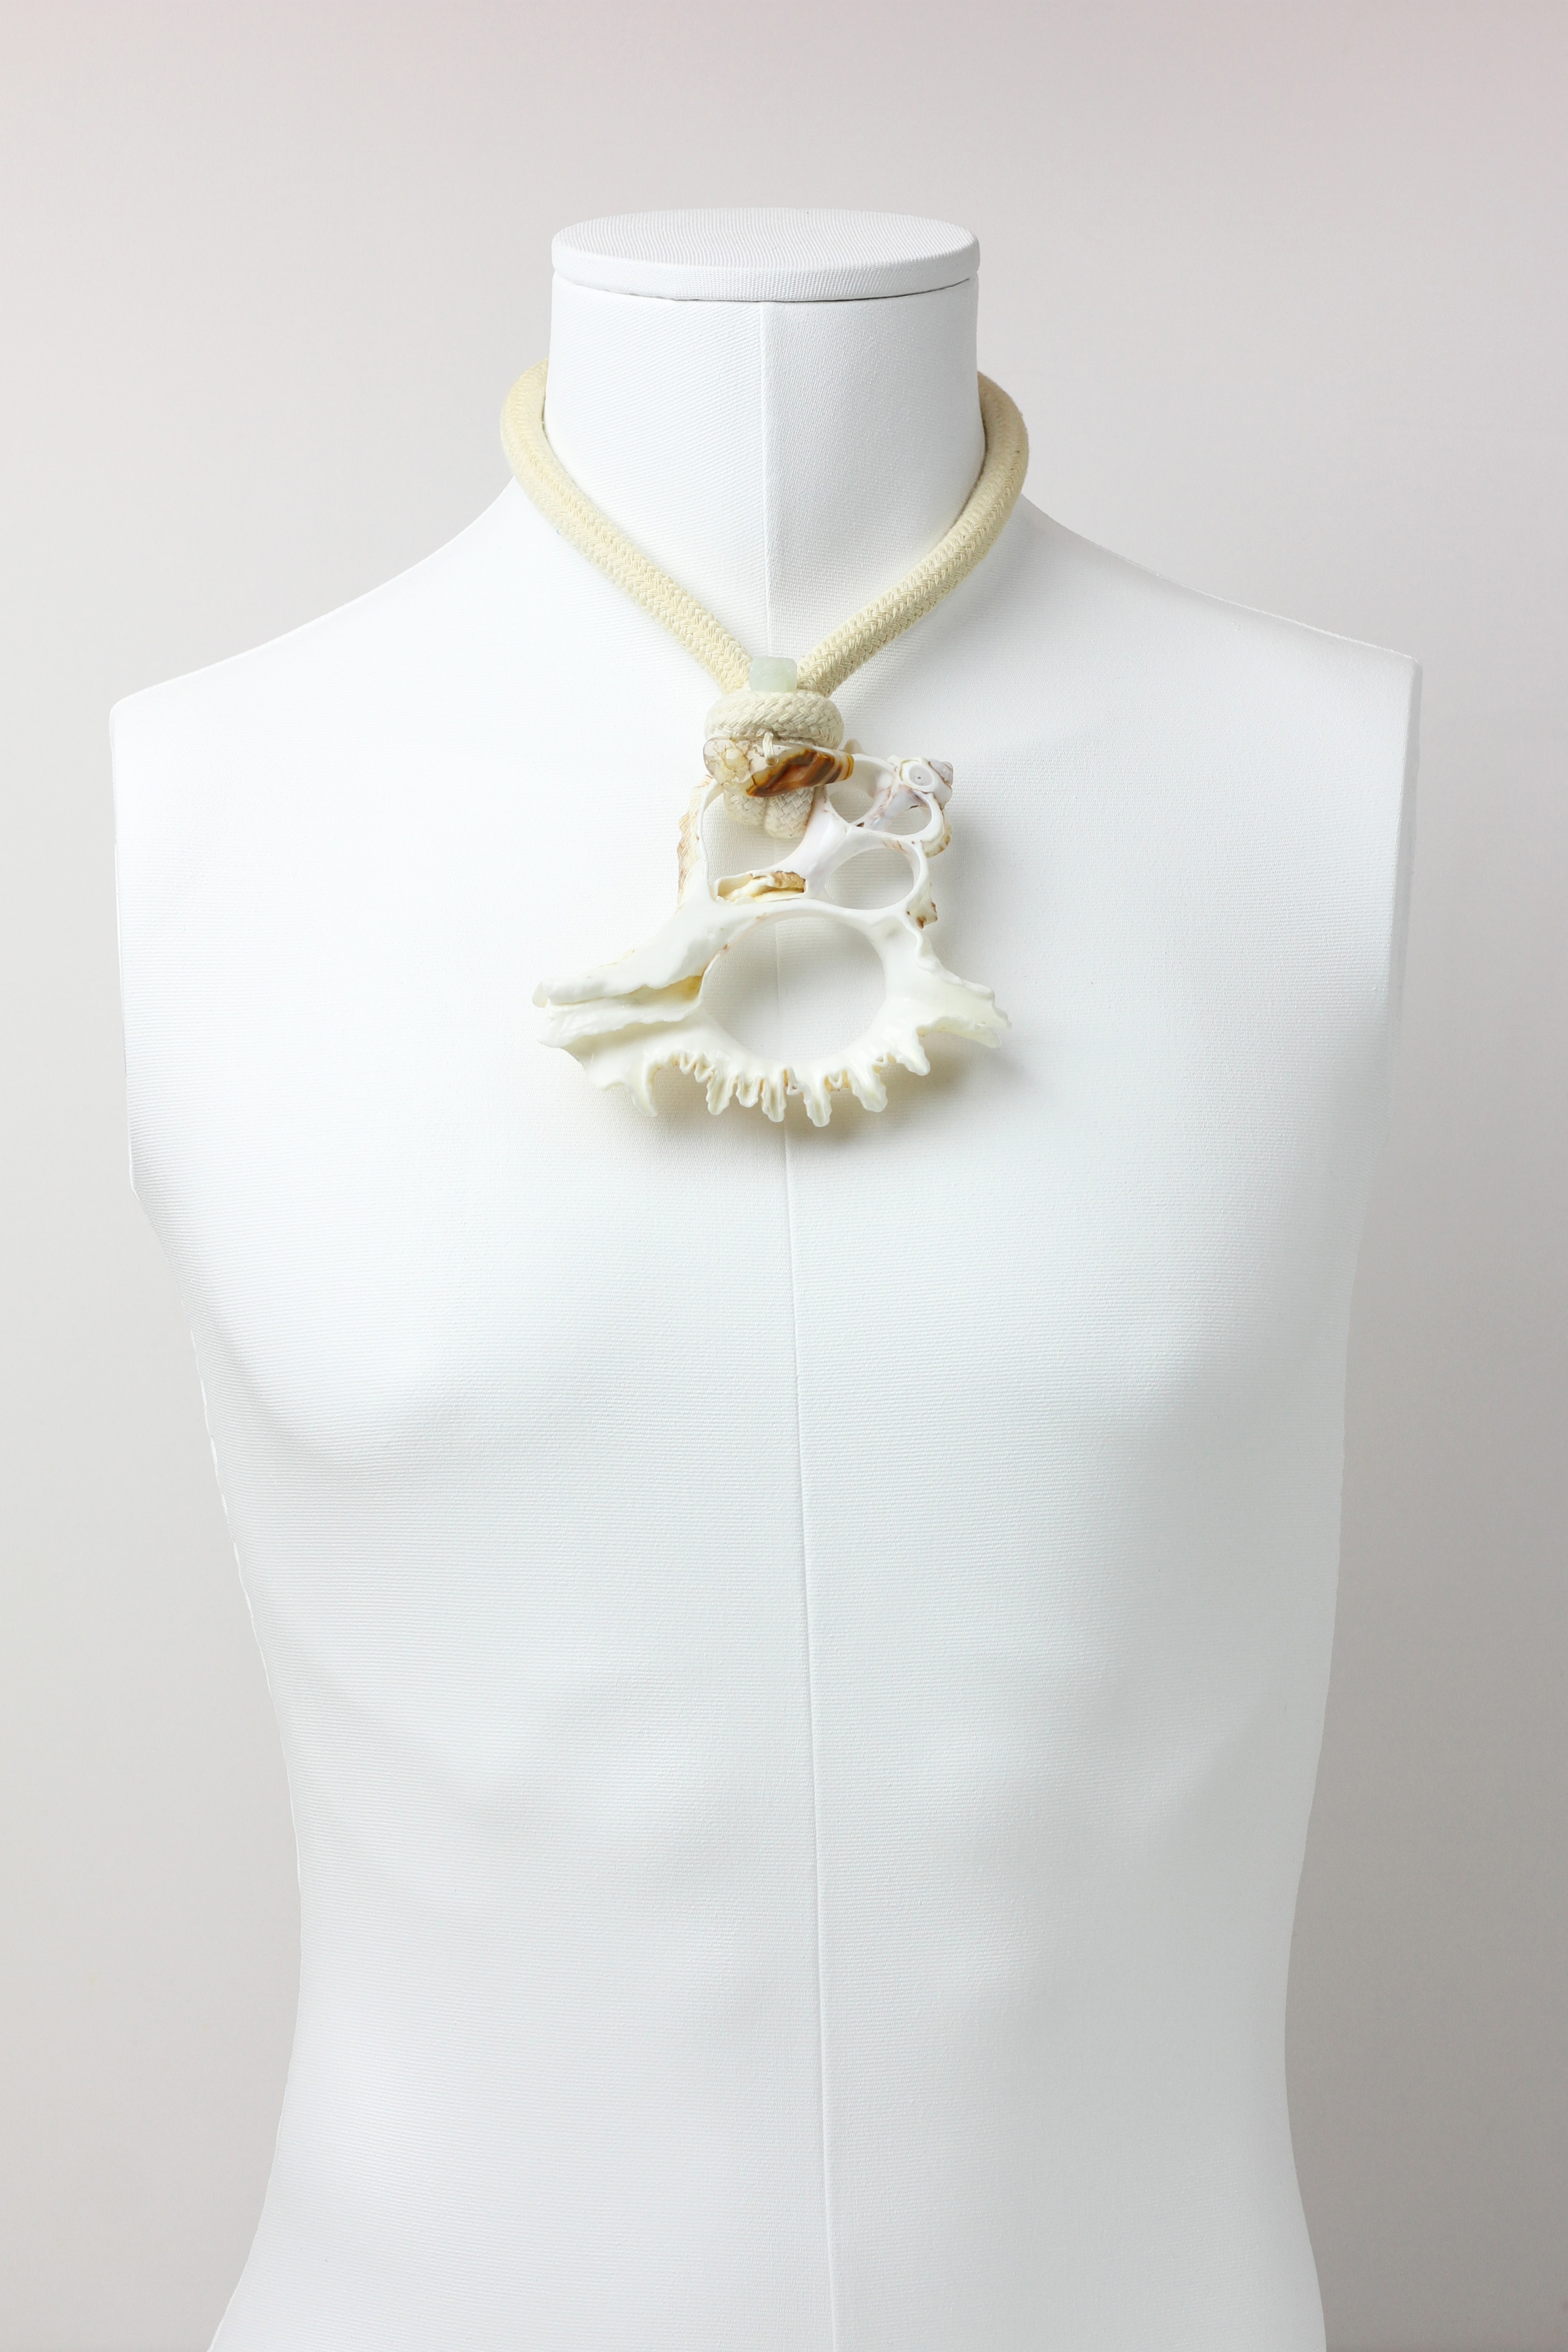 Conch shell necklace with jade skull